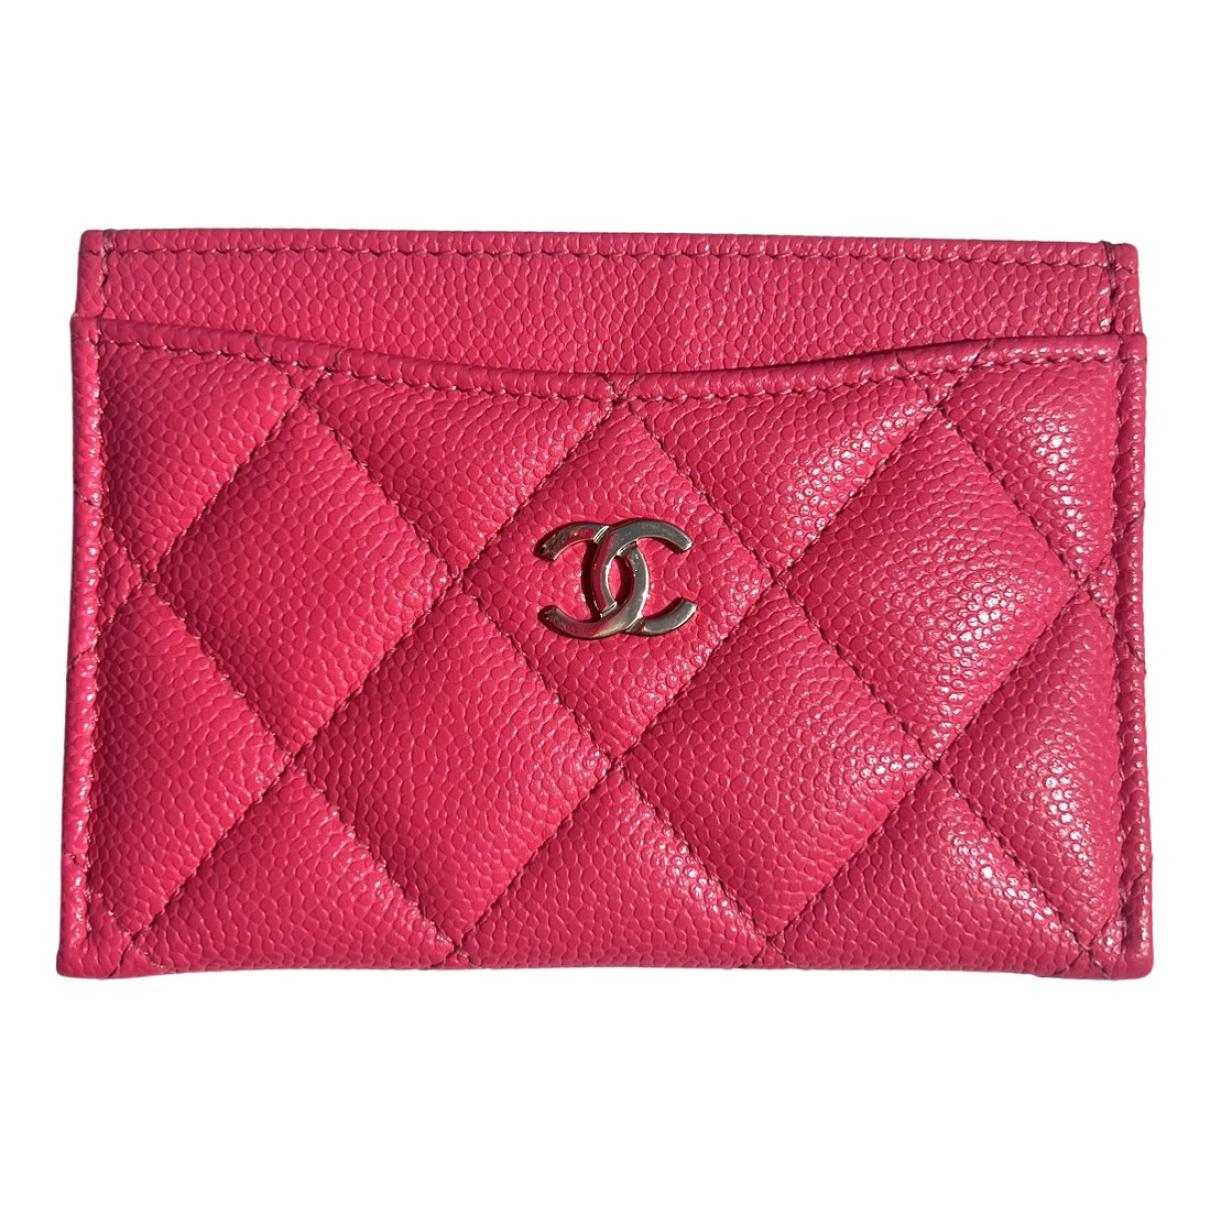 Timeless/classique leather wallet Chanel Pink in Leather - 35232697